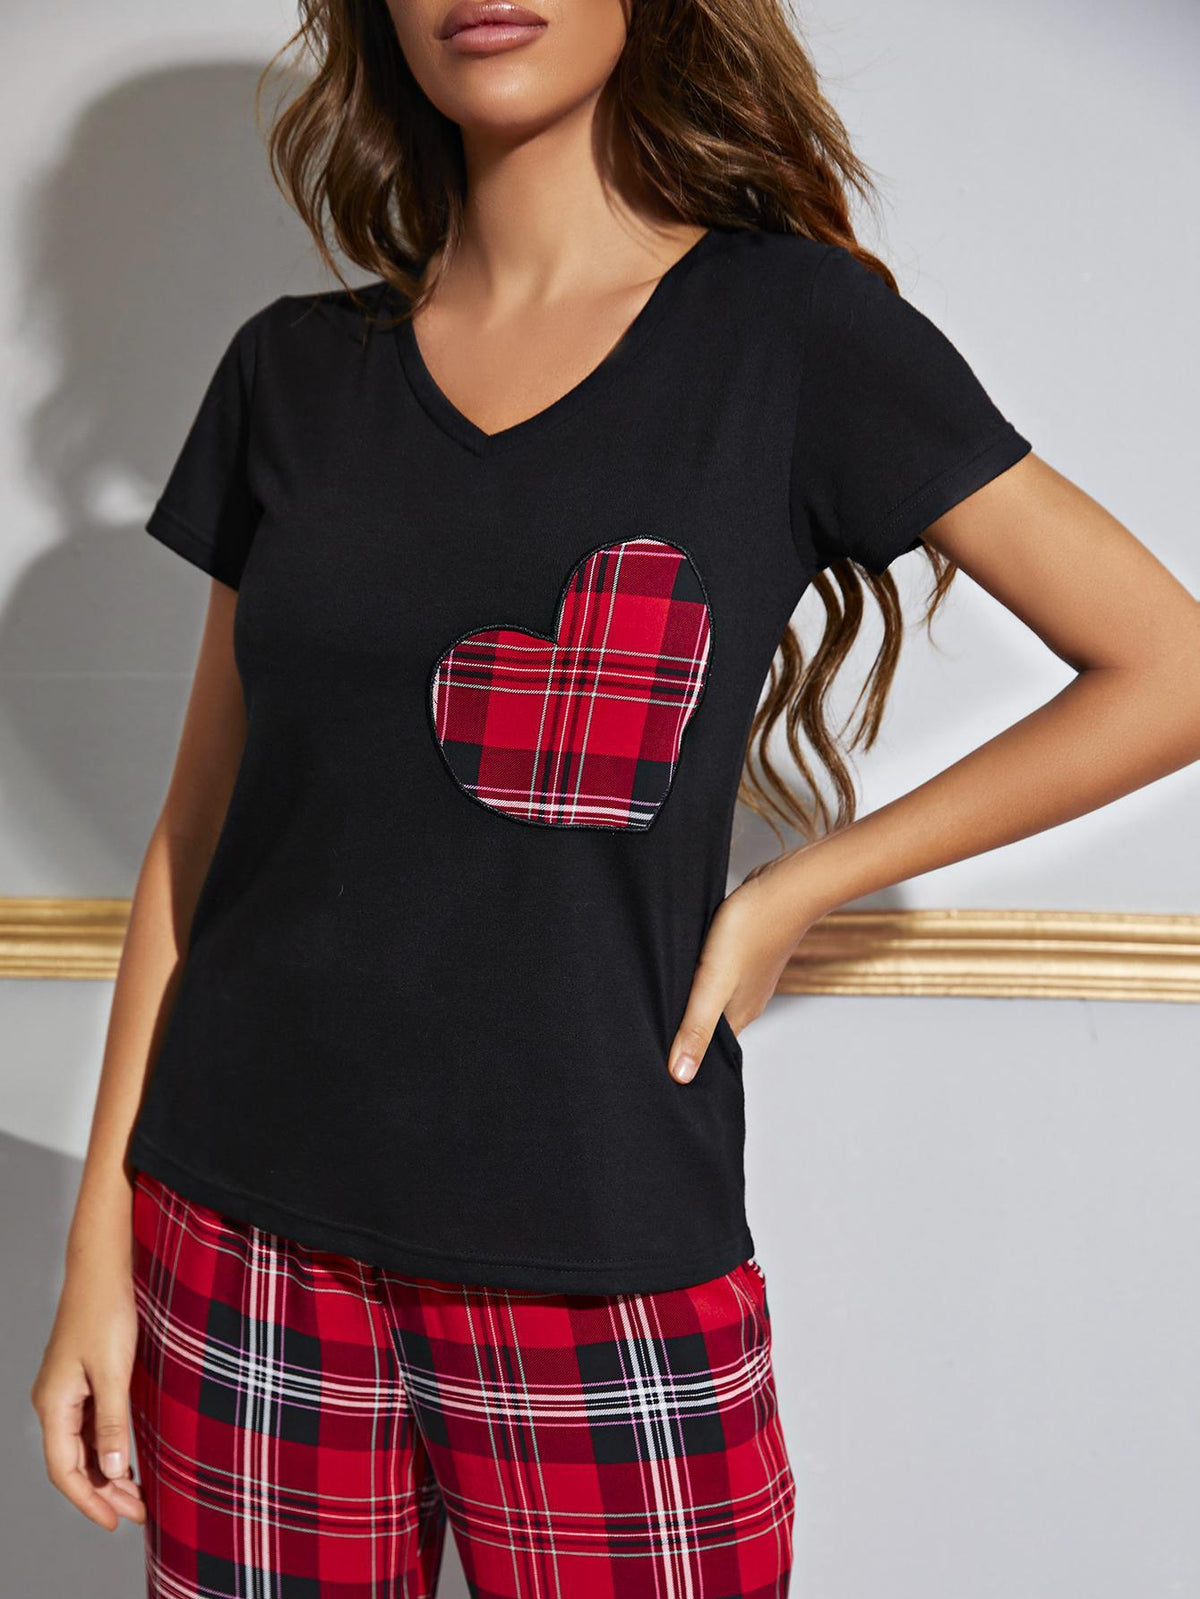 Heart Graphic V-Neck Top and Plaid Pants Lounge Set - Crazy Like a Daisy Boutique #